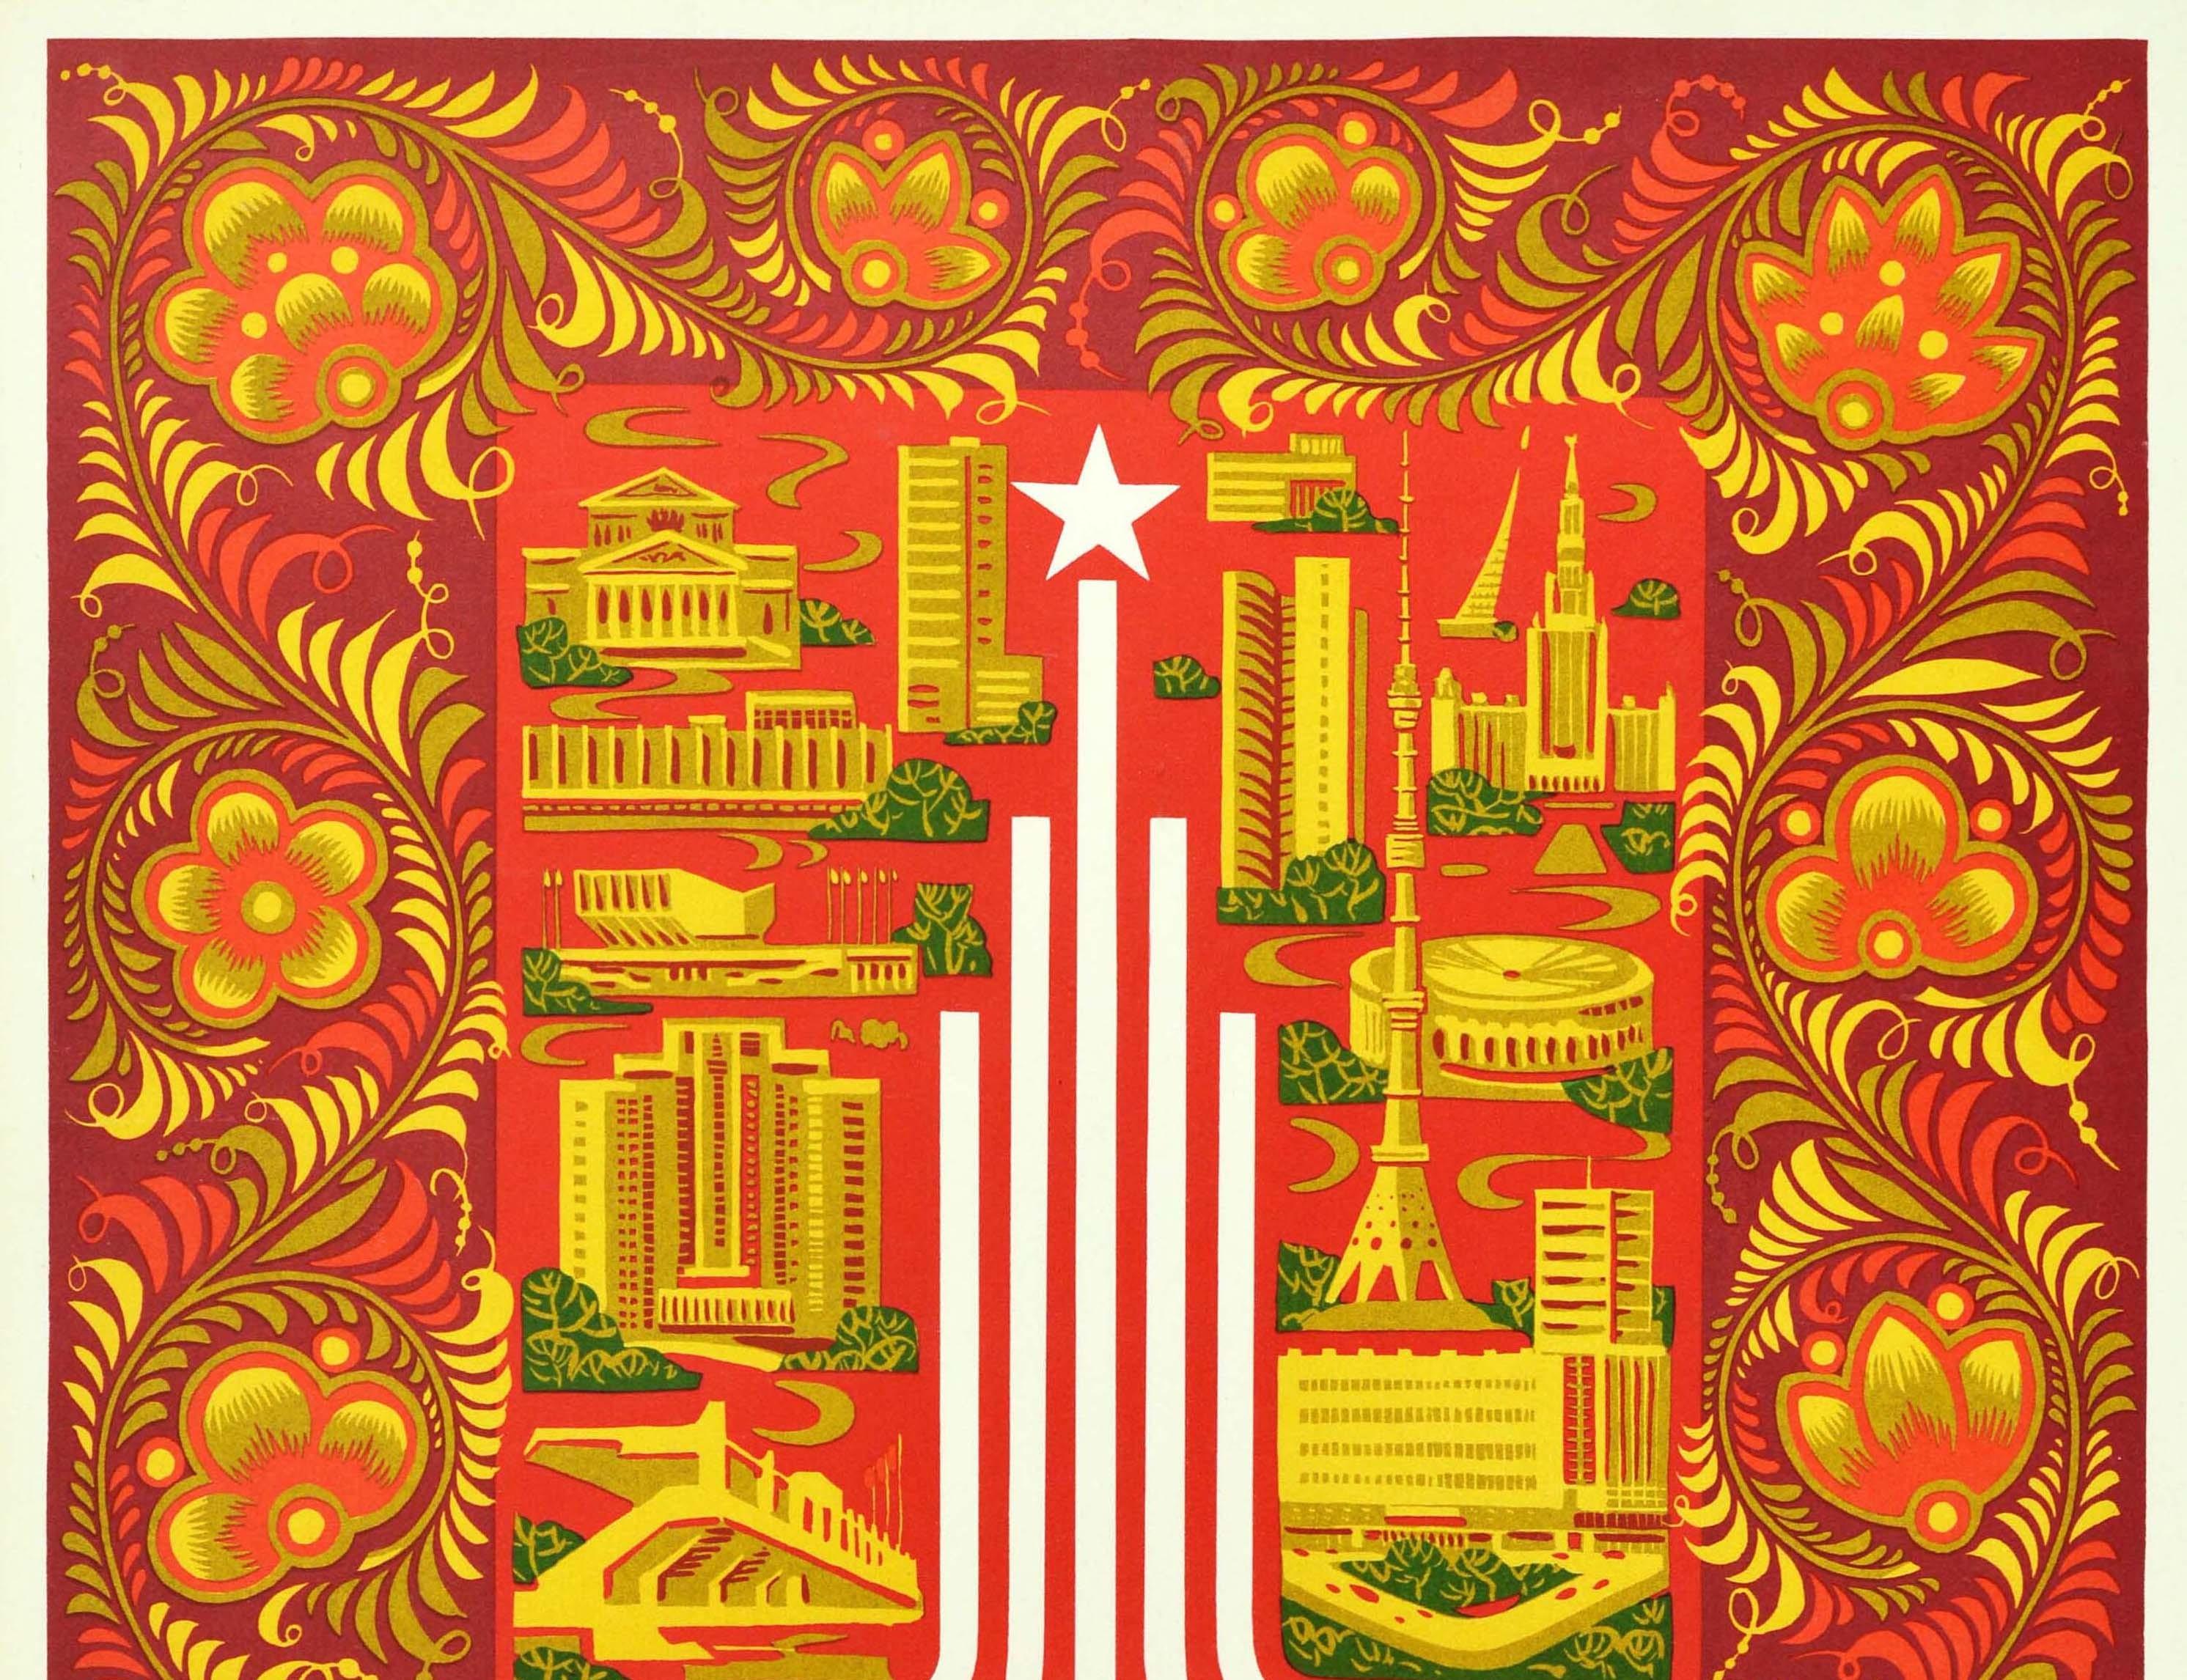 Original vintage Soviet sports poster for the 22nd Summer Olympic Games / Games of the XXII Olympiad in 1980 held in Moscow Russia featuring a colourful architectural illustration of stadiums built for the Olympics and notable structures and places